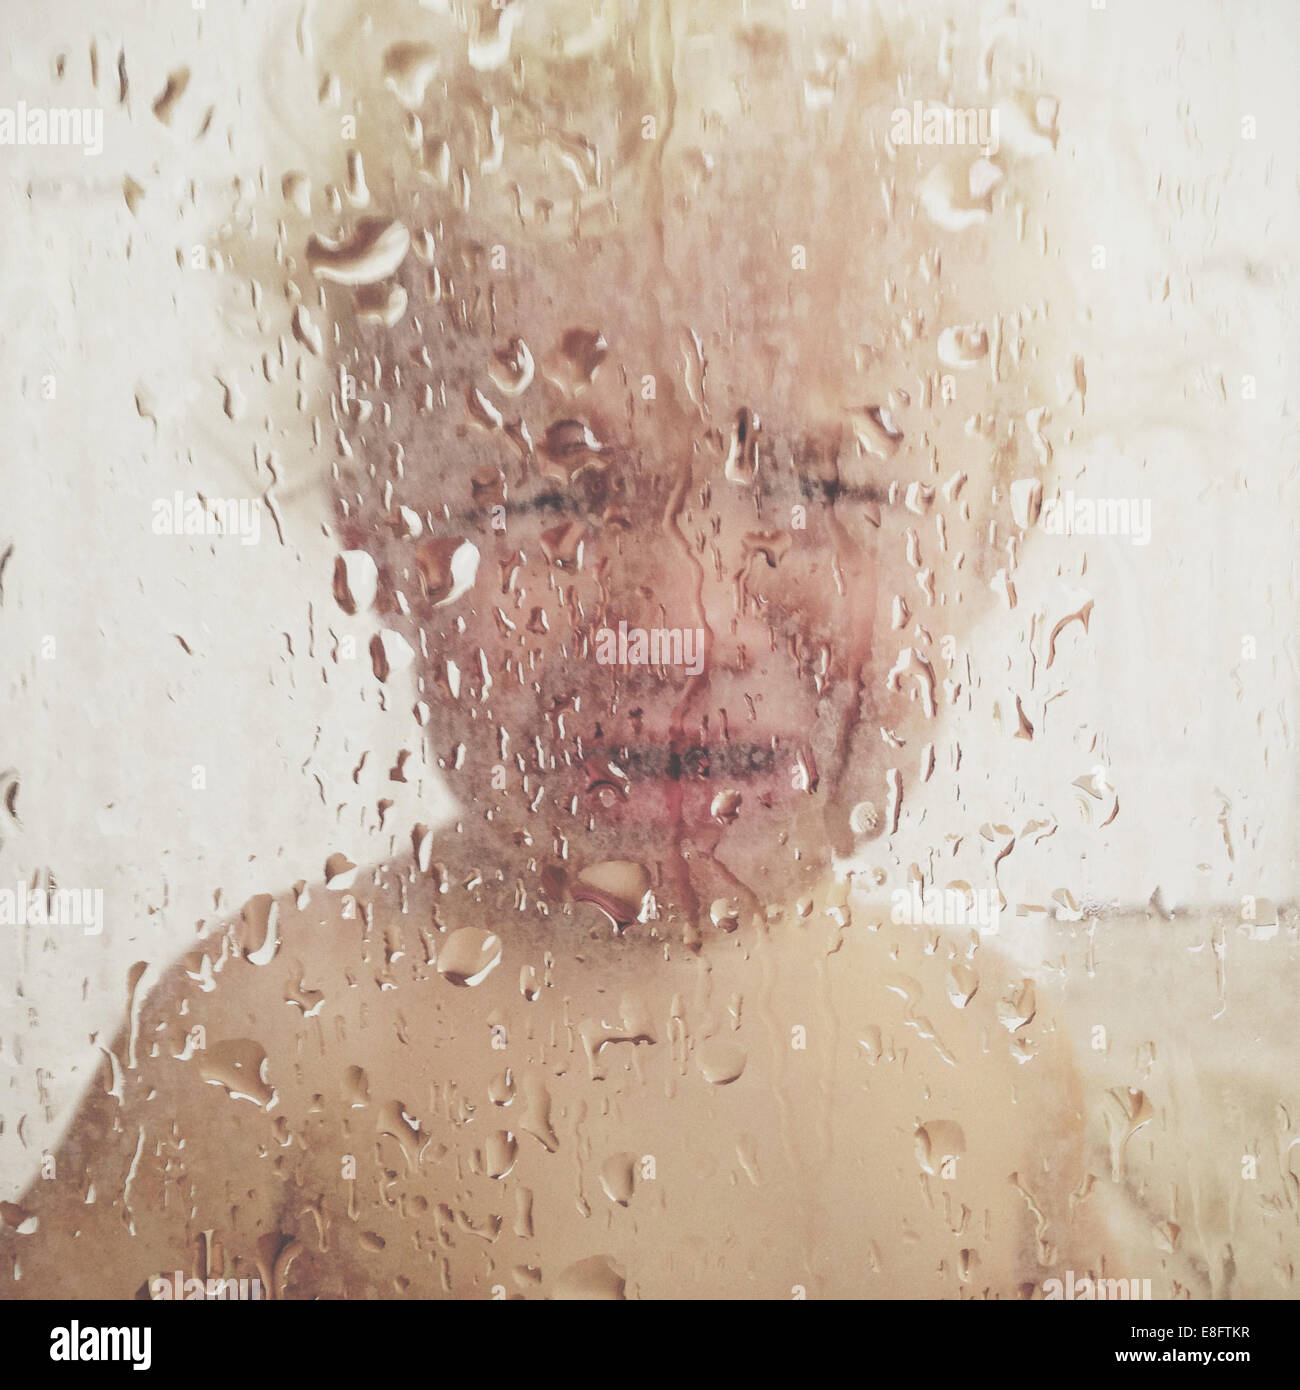 Portrait of a Boy standing in the shower crying Stock Photo